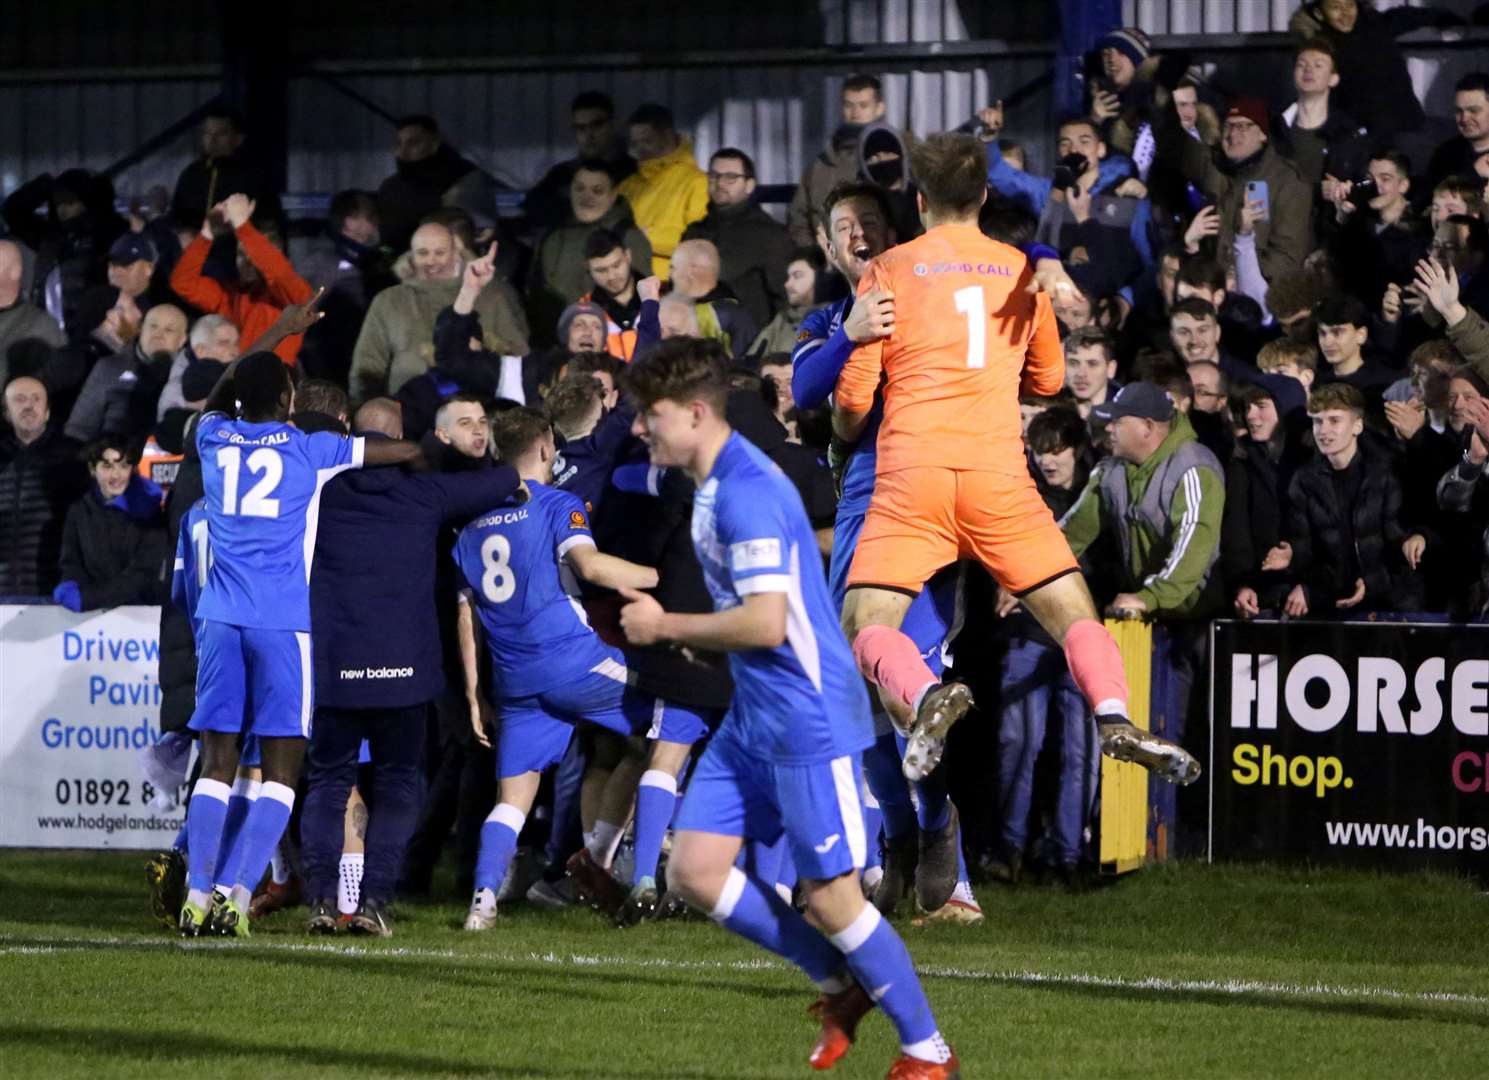 Tonbridge celebrate their shoot-out win over King's Lynn. Picture: Dave Couldridge (54298697)